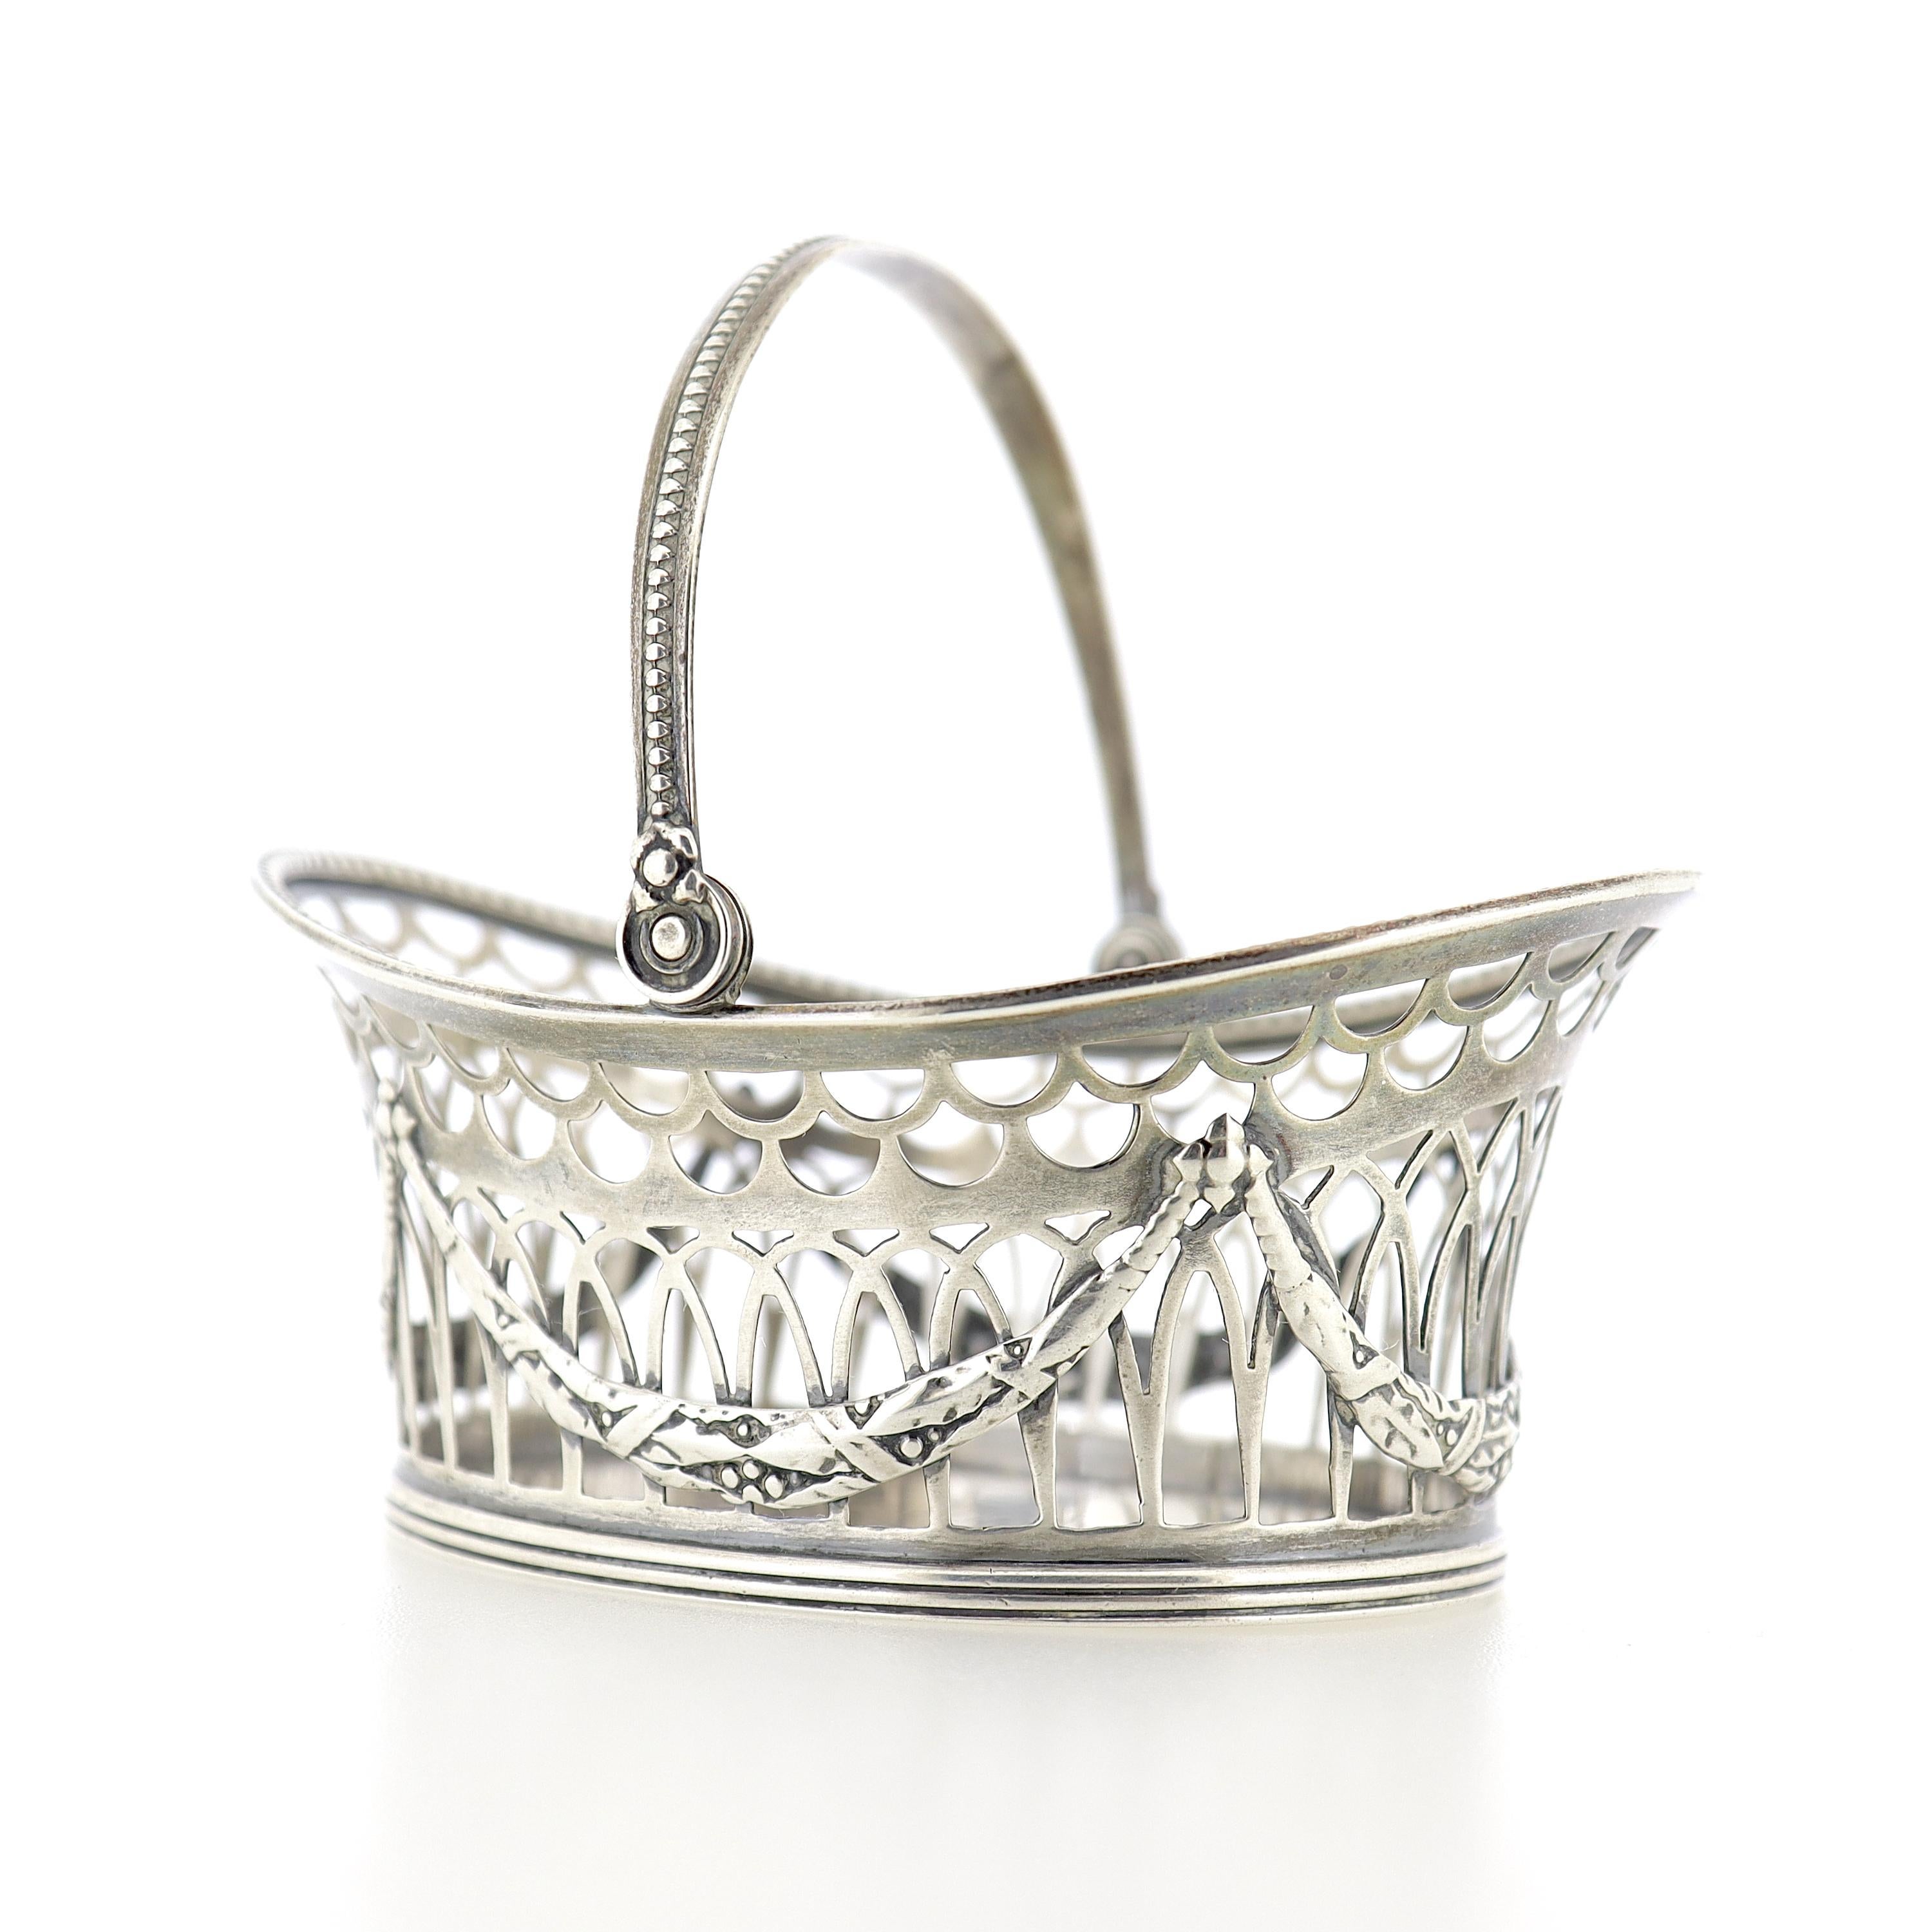 A fine antique sterling silver basket.

By Gorham.

In the form of a small handled openwork basket with decorative molded garlands to the exterior.

Simply a great diminutive basket from Gorham!

Date:
20th Century

Overall Condition:
It is in